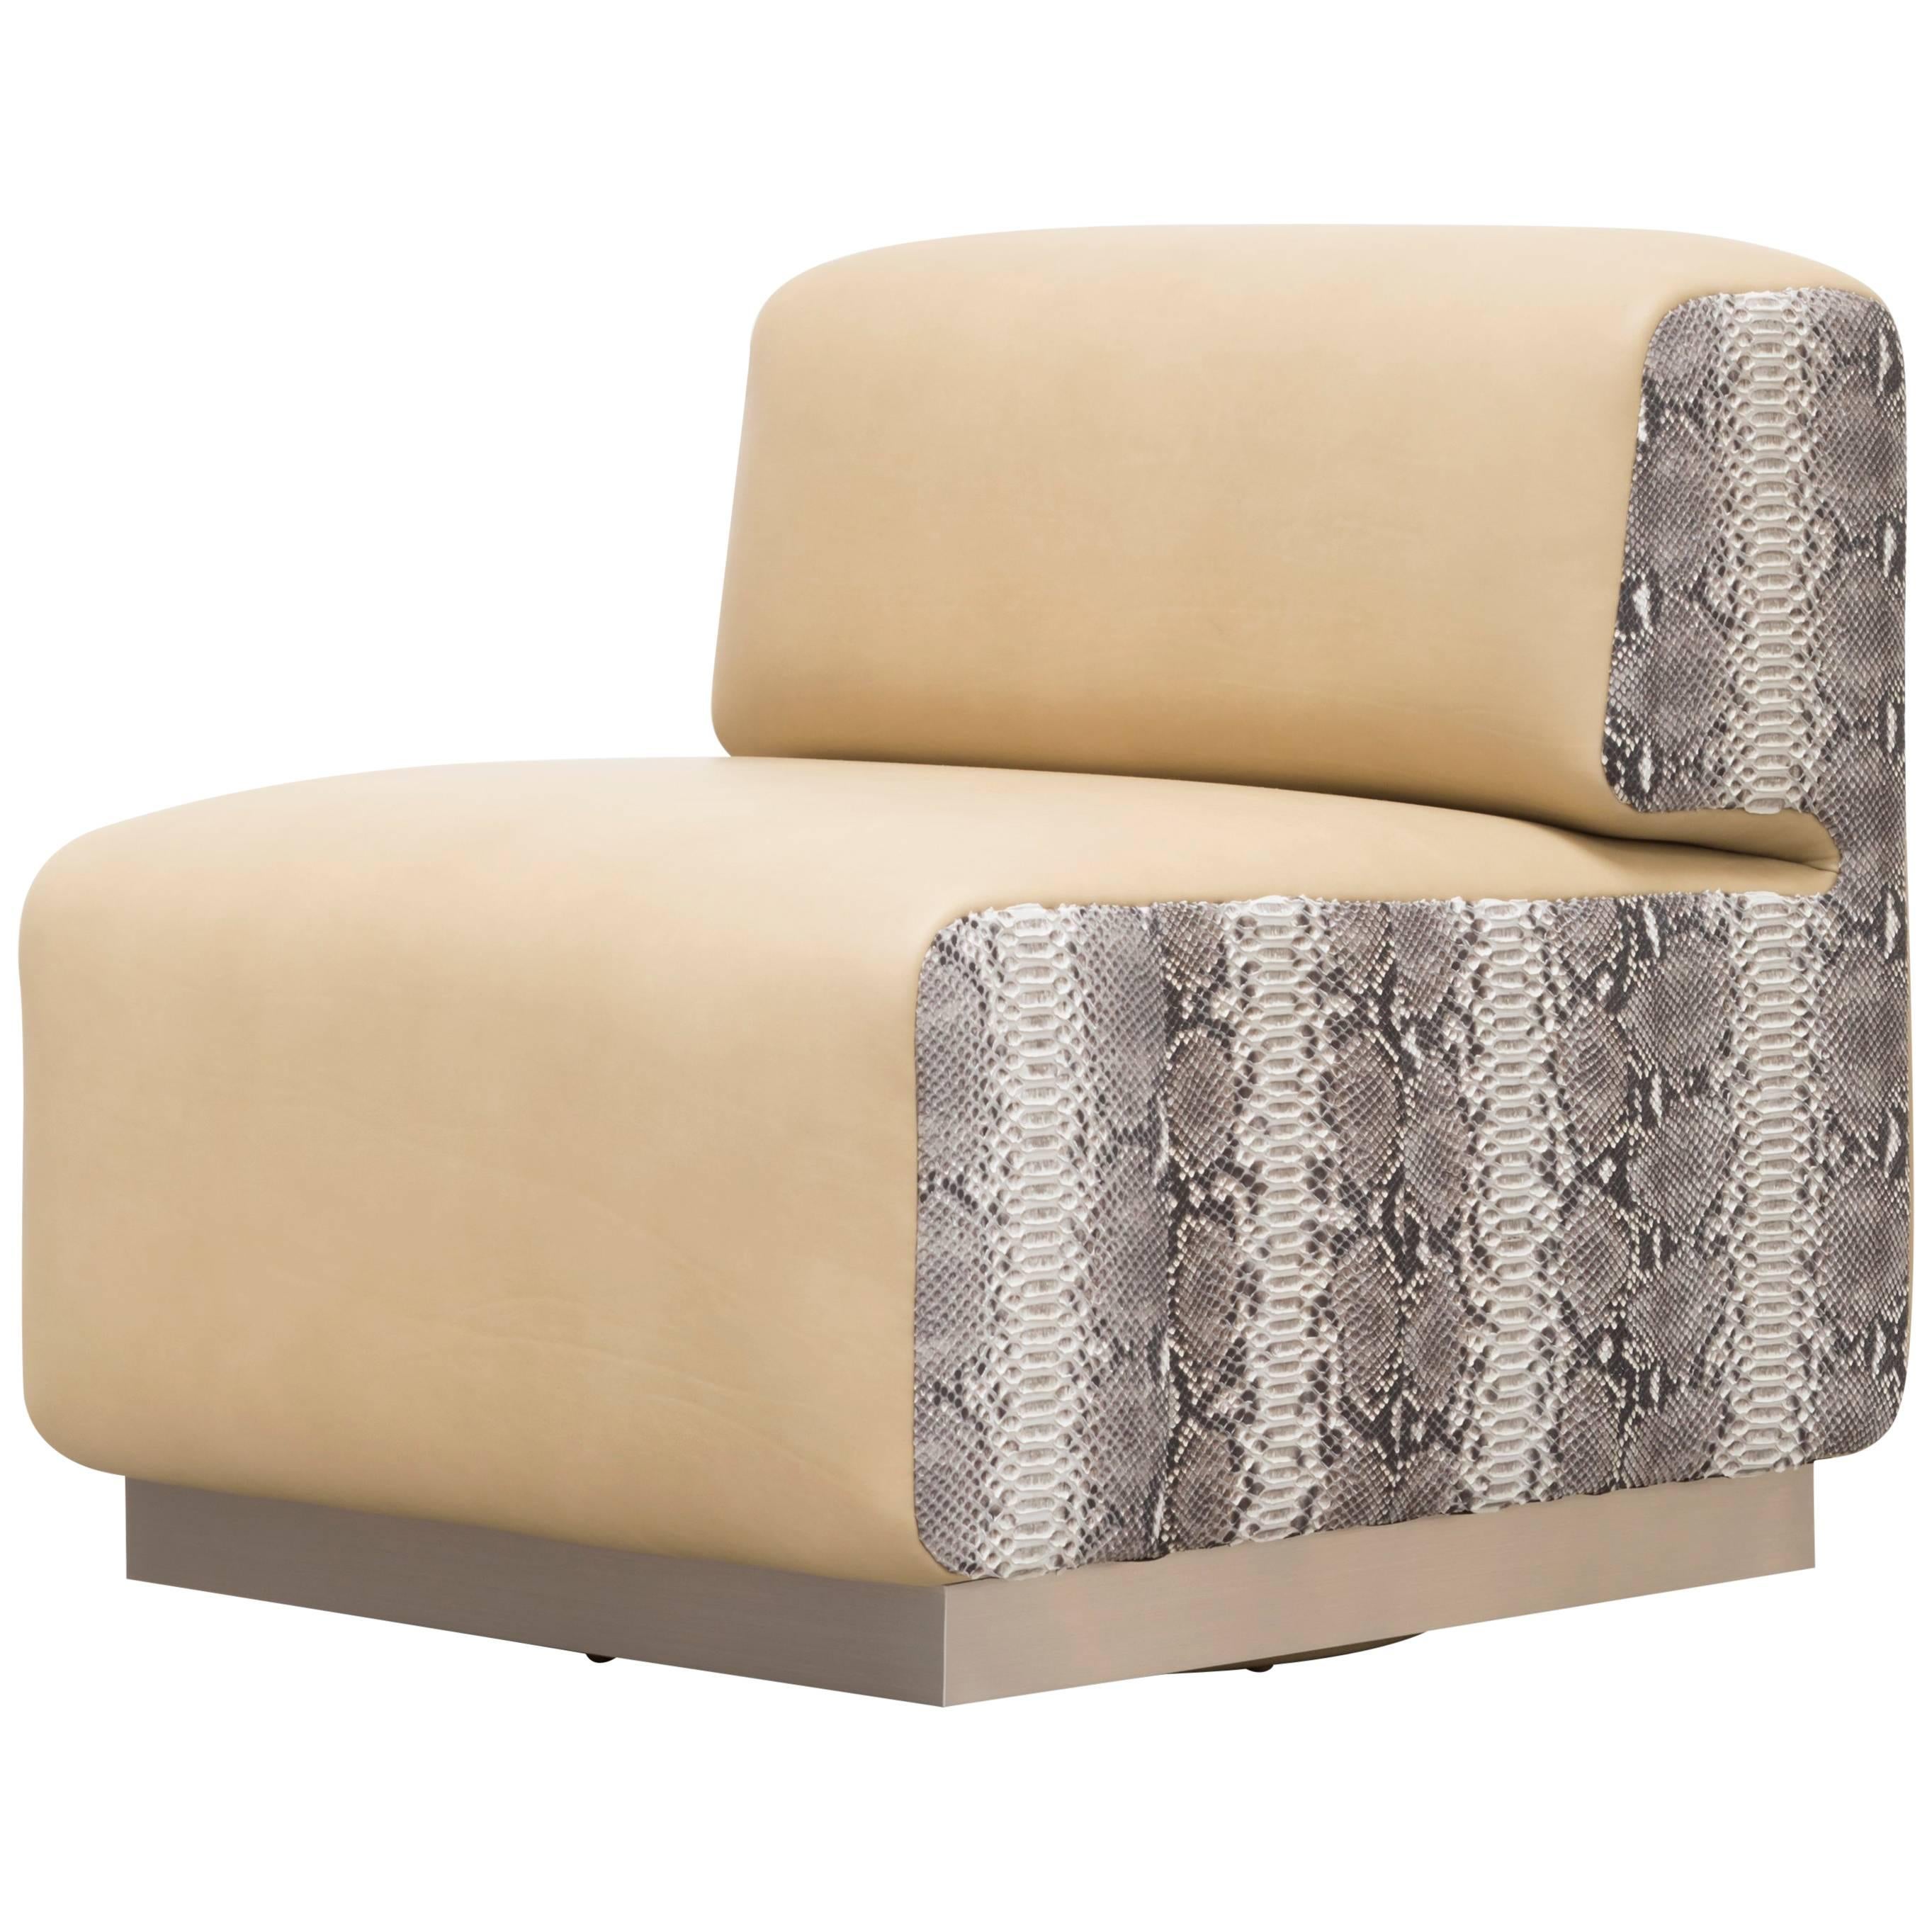 LEGER CHAIR - Modern Chair COL with Python Skin Side Panels For Sale